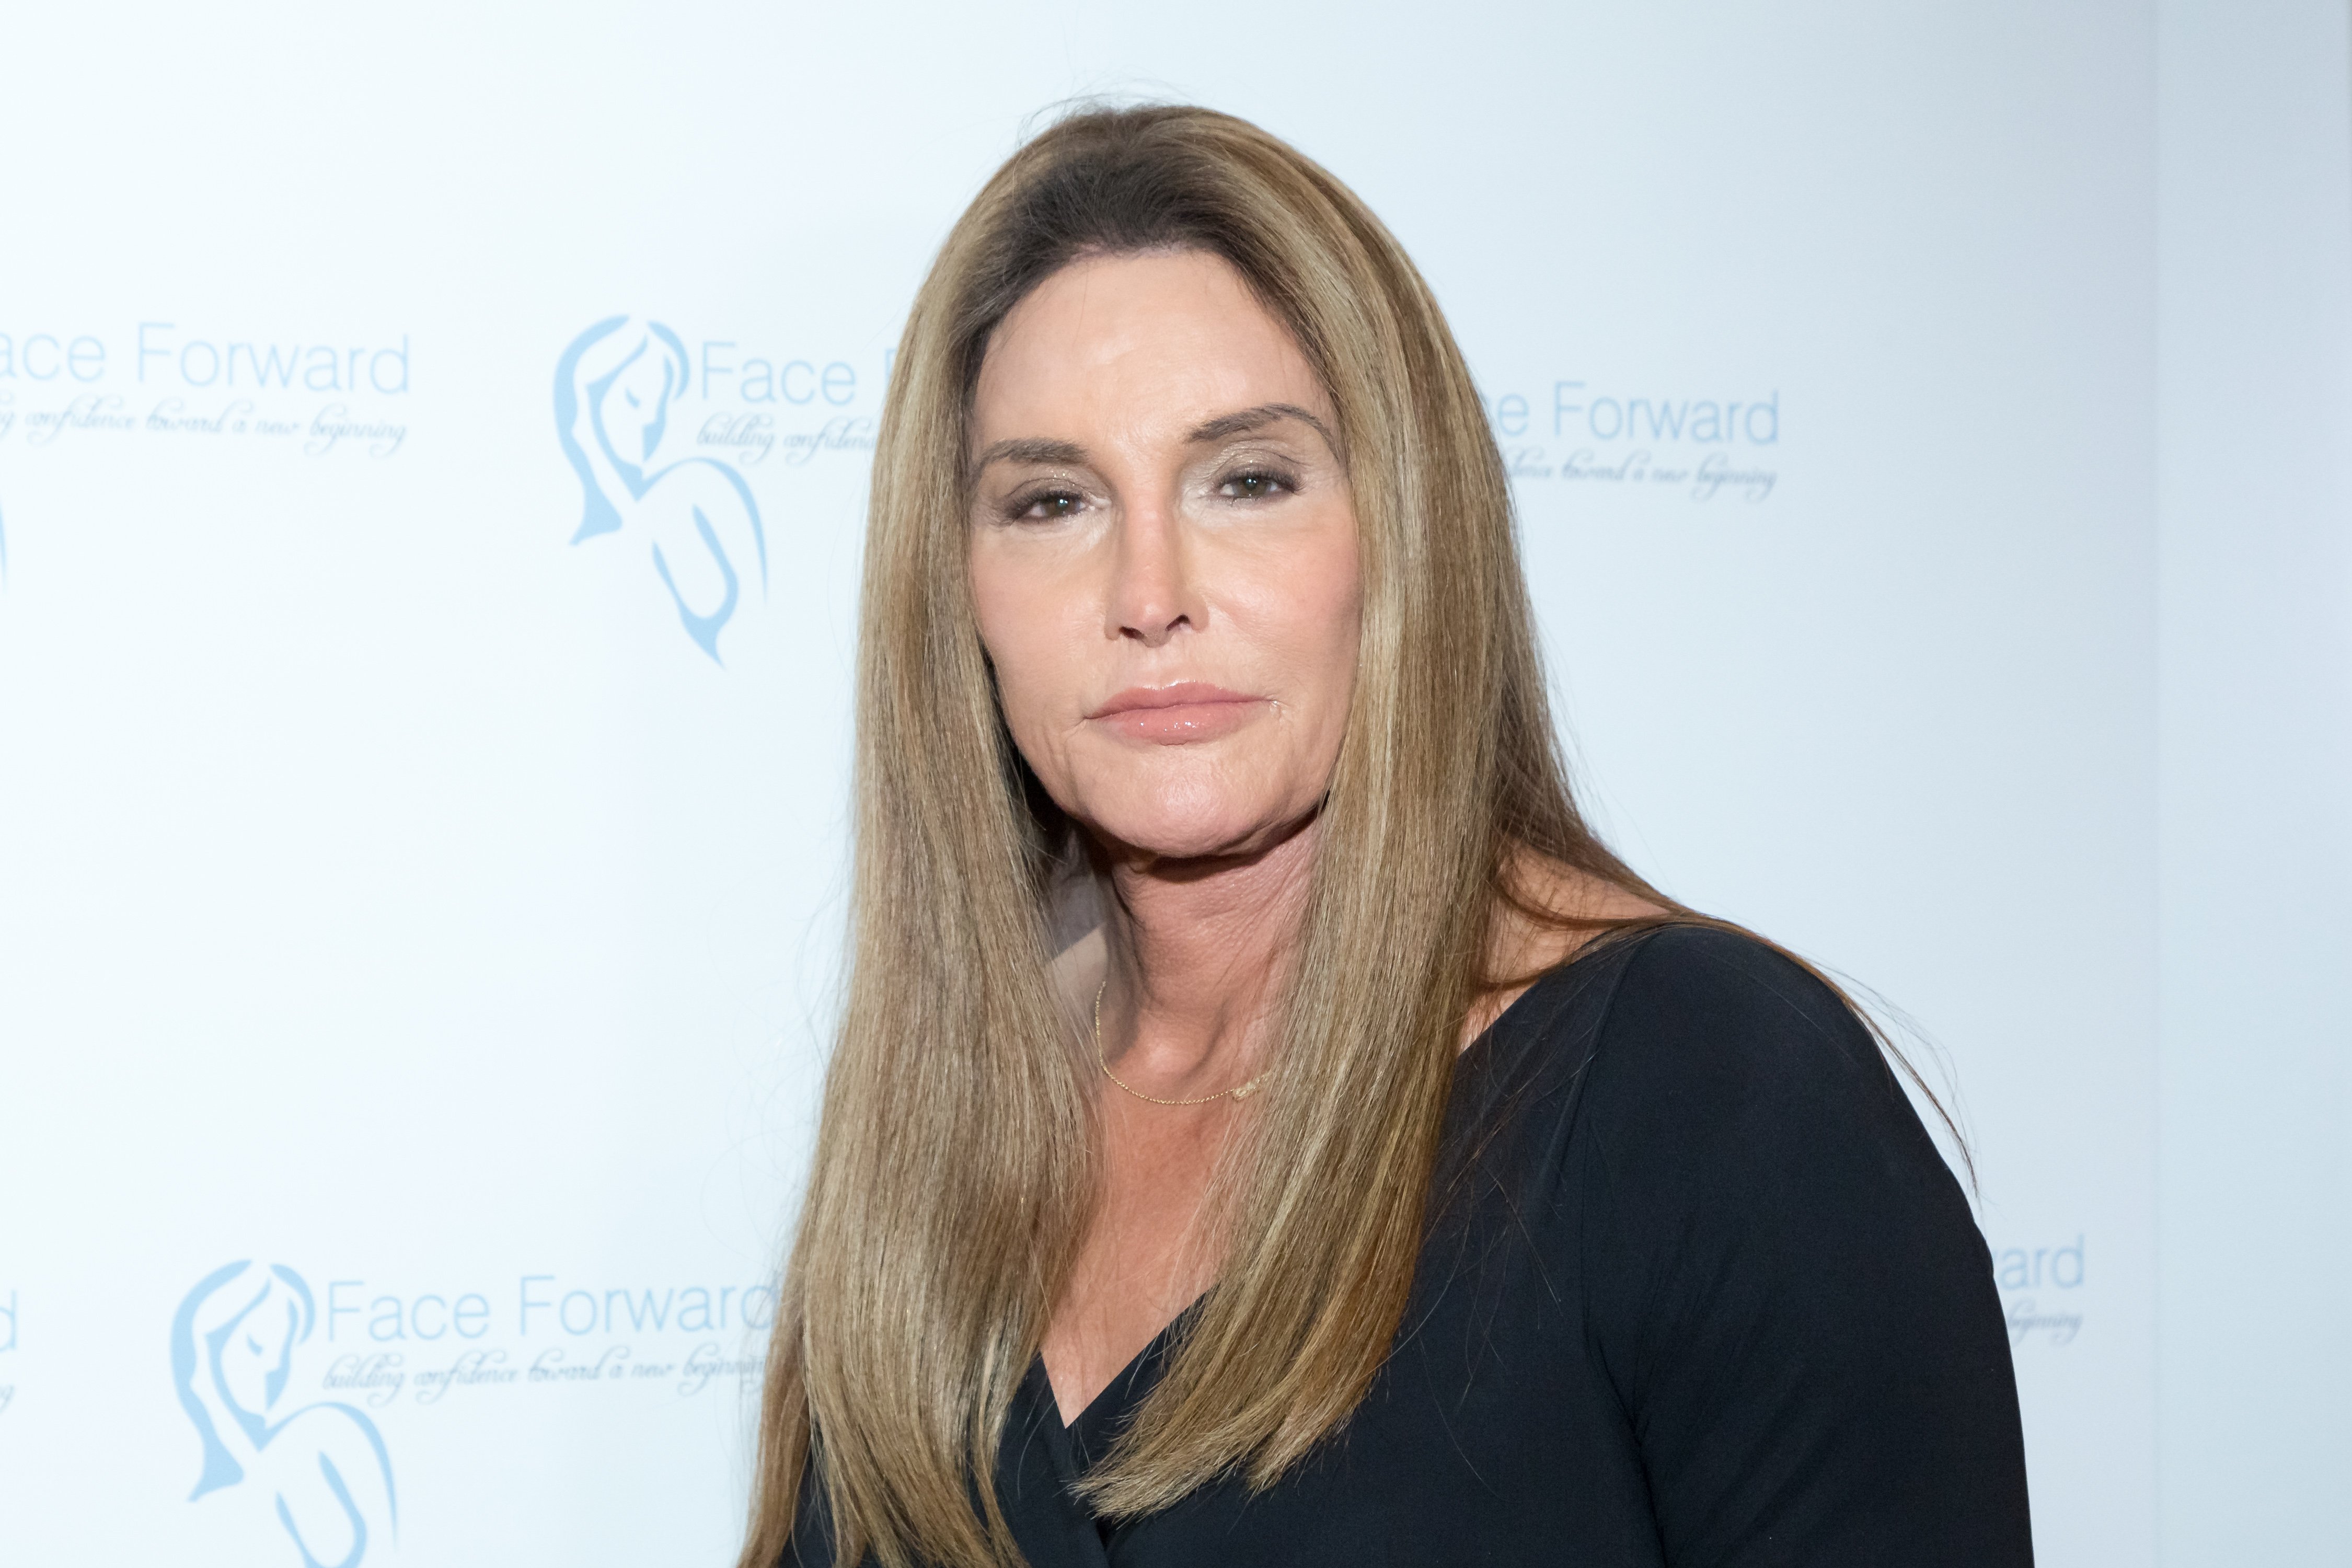 Caitlyn Jenner attends the Face Forward's 10th Annual "La Dolce Vita" Themed Gala at the Beverly Wilshire Four Seasons Hotel on September 22, 2018 in Beverly Hills, California | Photo: GettyImages